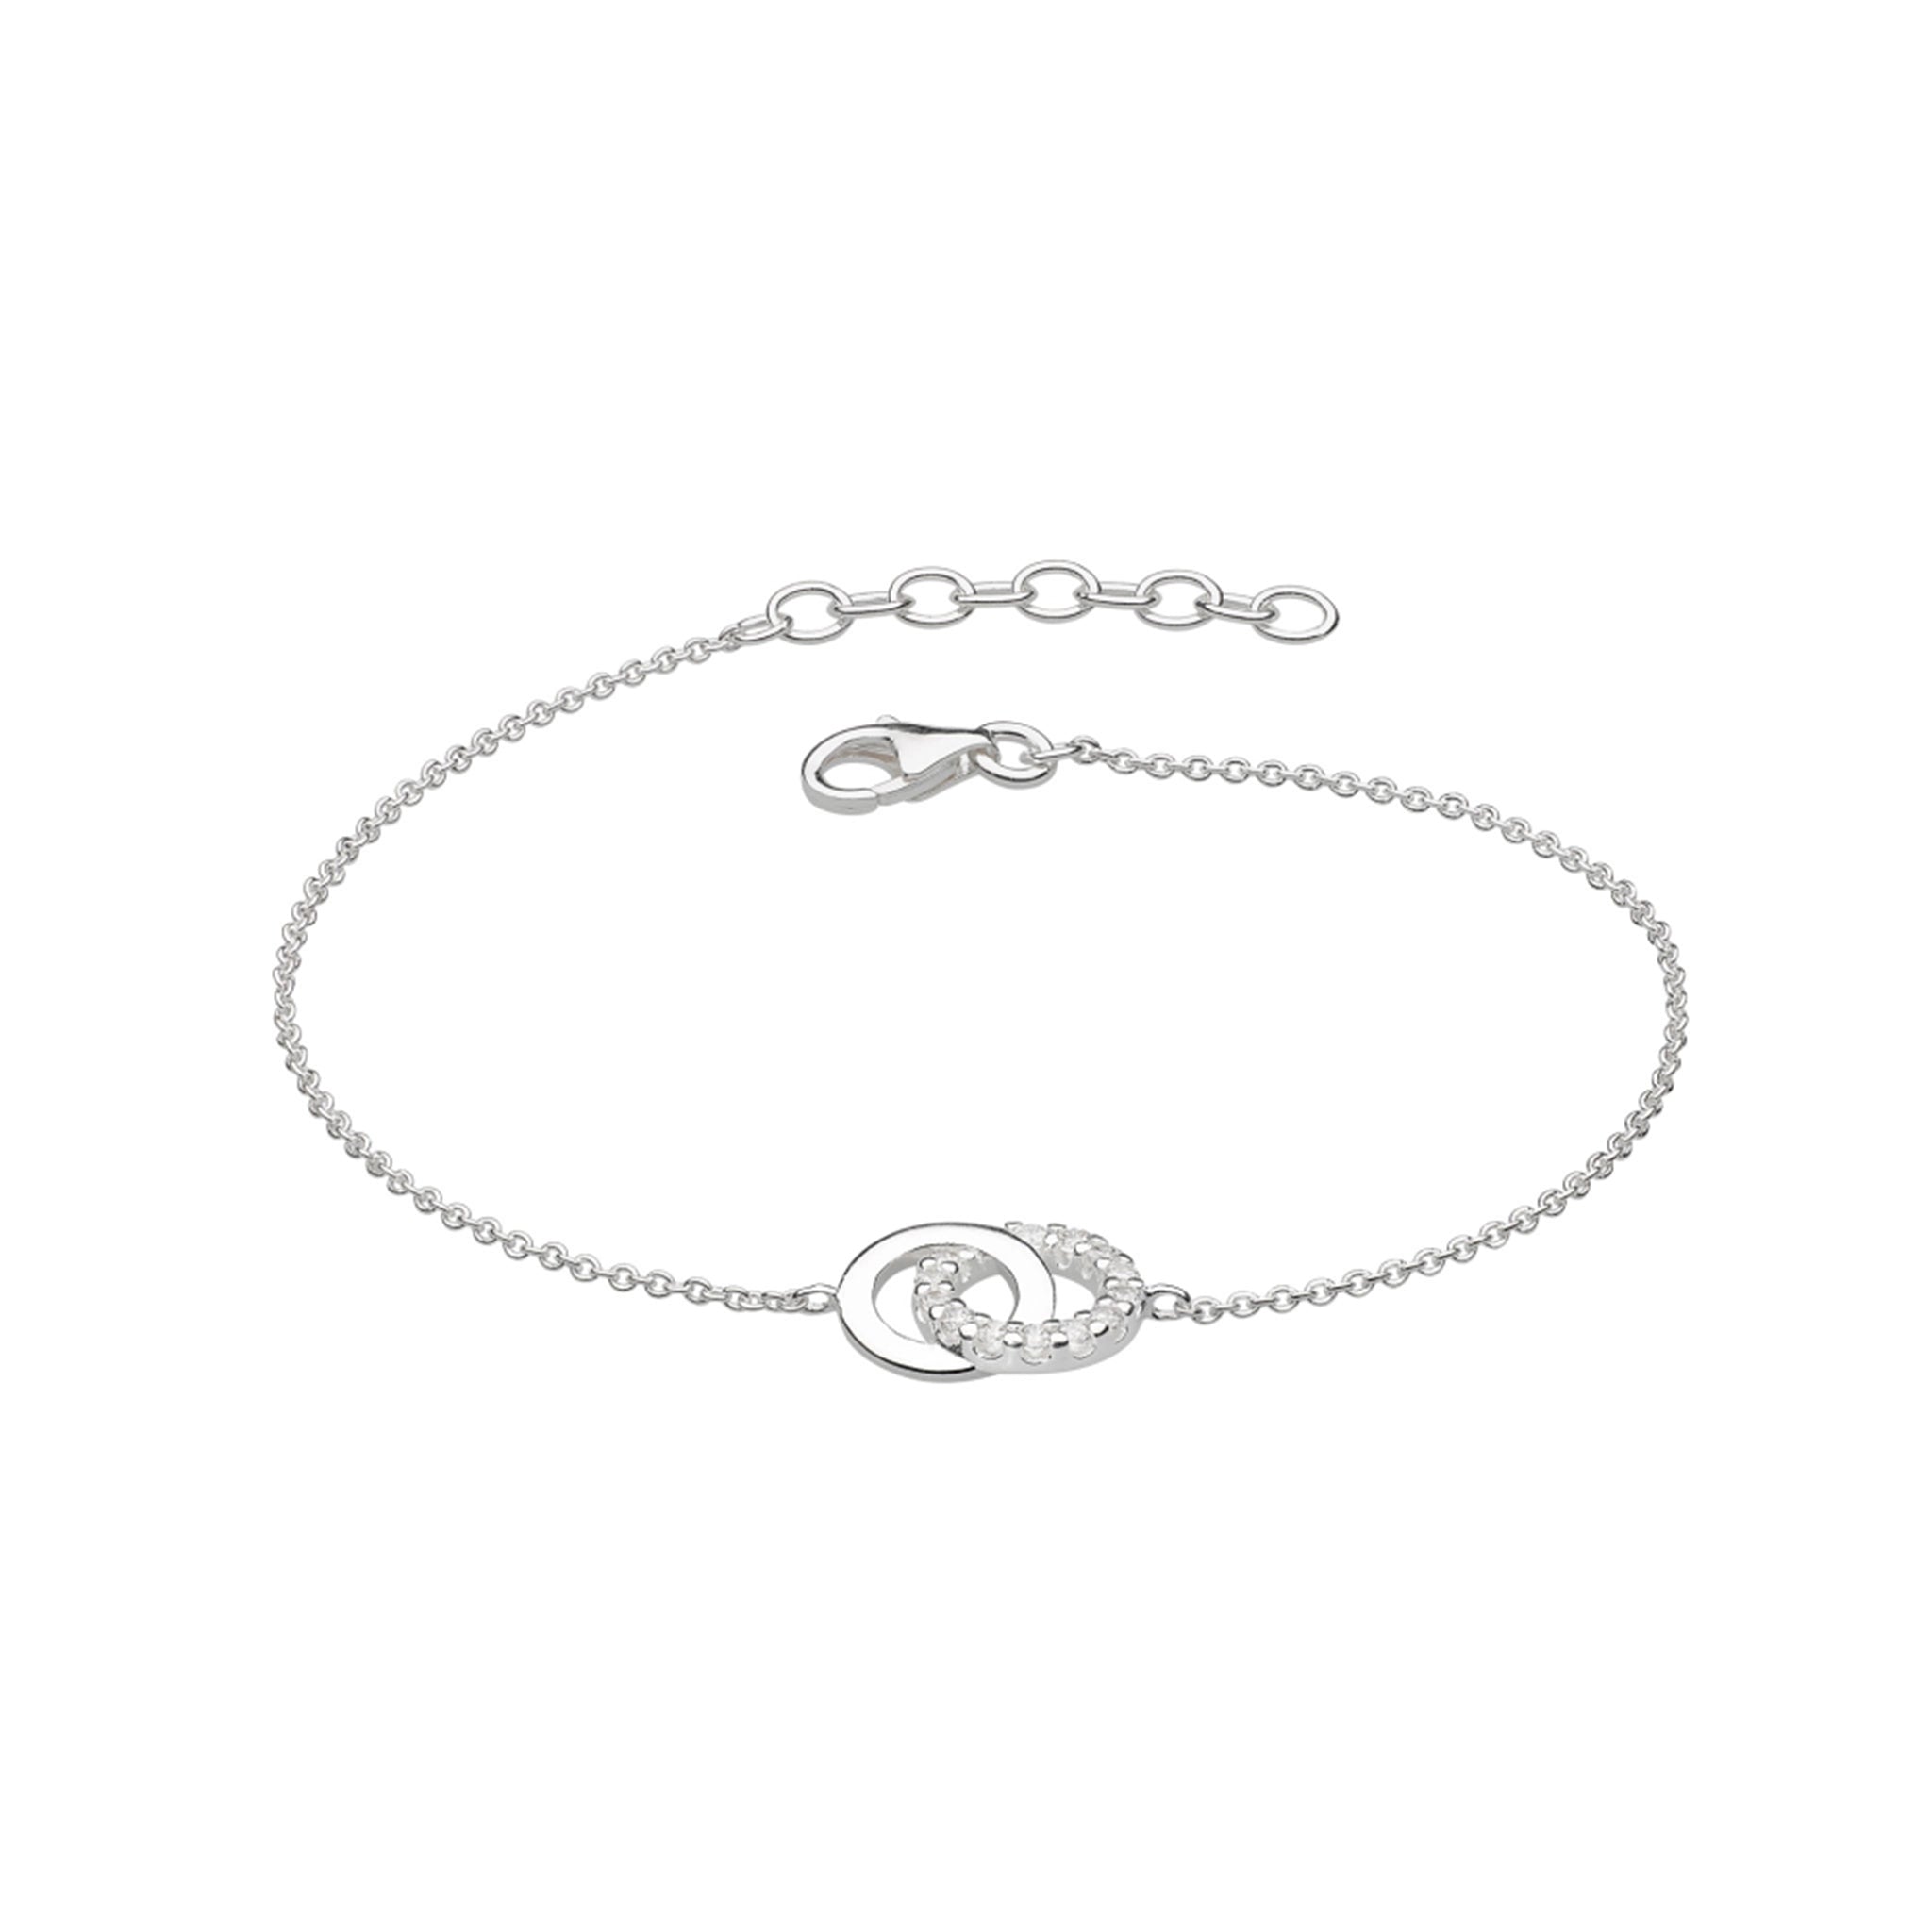 Bracelet with two linked open circles in polished silver and CZ stones